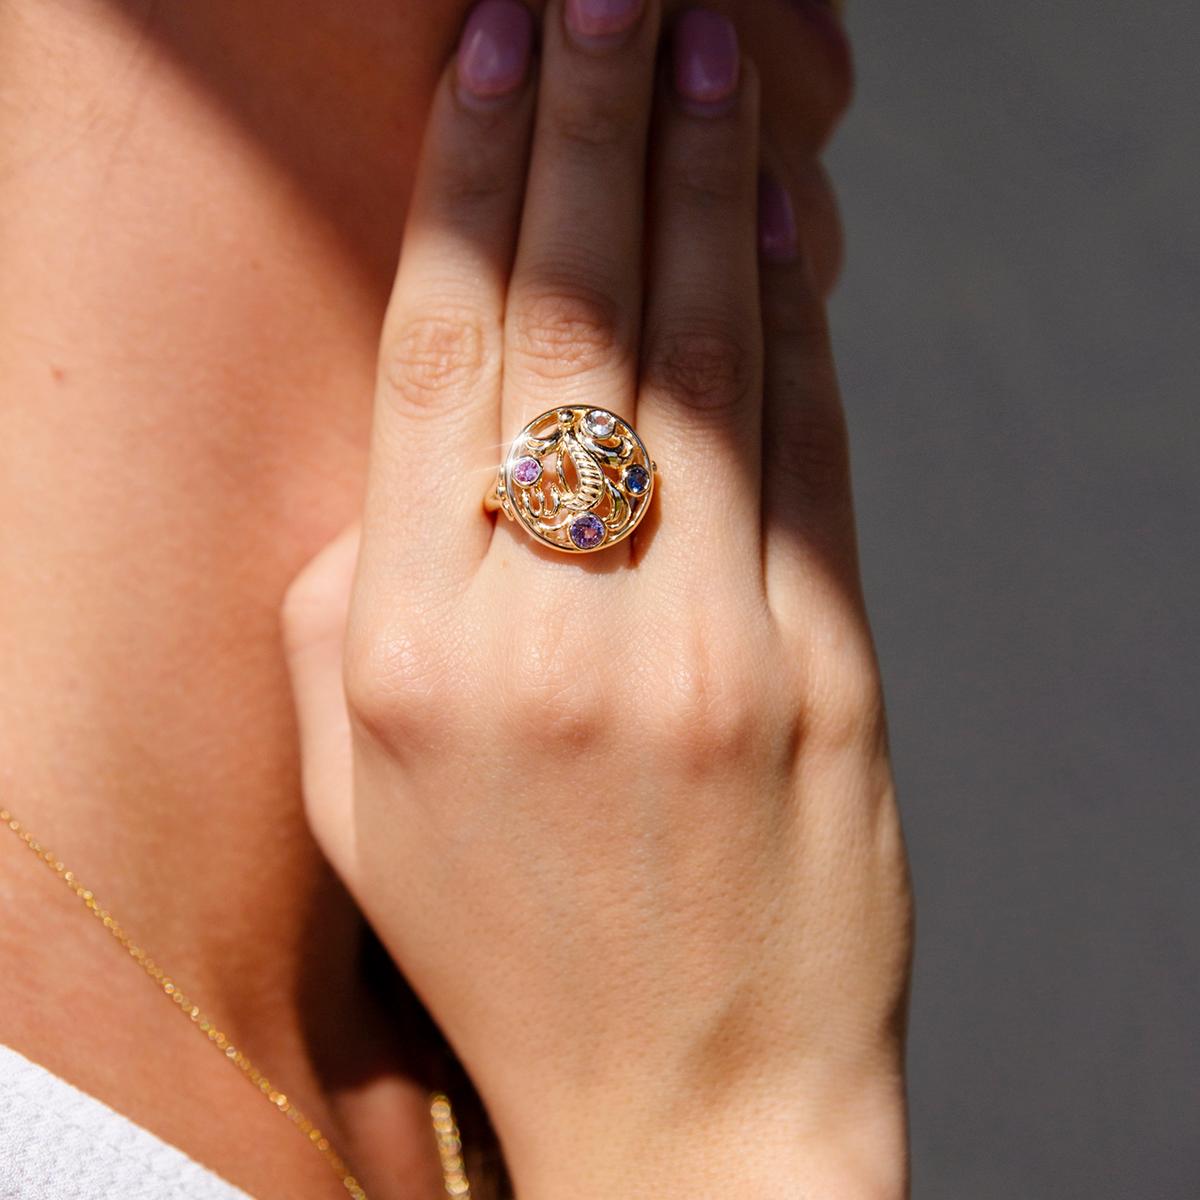 Forged in 14 carat yellow gold, this gorgeous contemporary motif ring features a diversity of wonderful natural sapphires in rub over settings resting in a gleaming and carefully designed circular motif. The featured gems are a bright purple